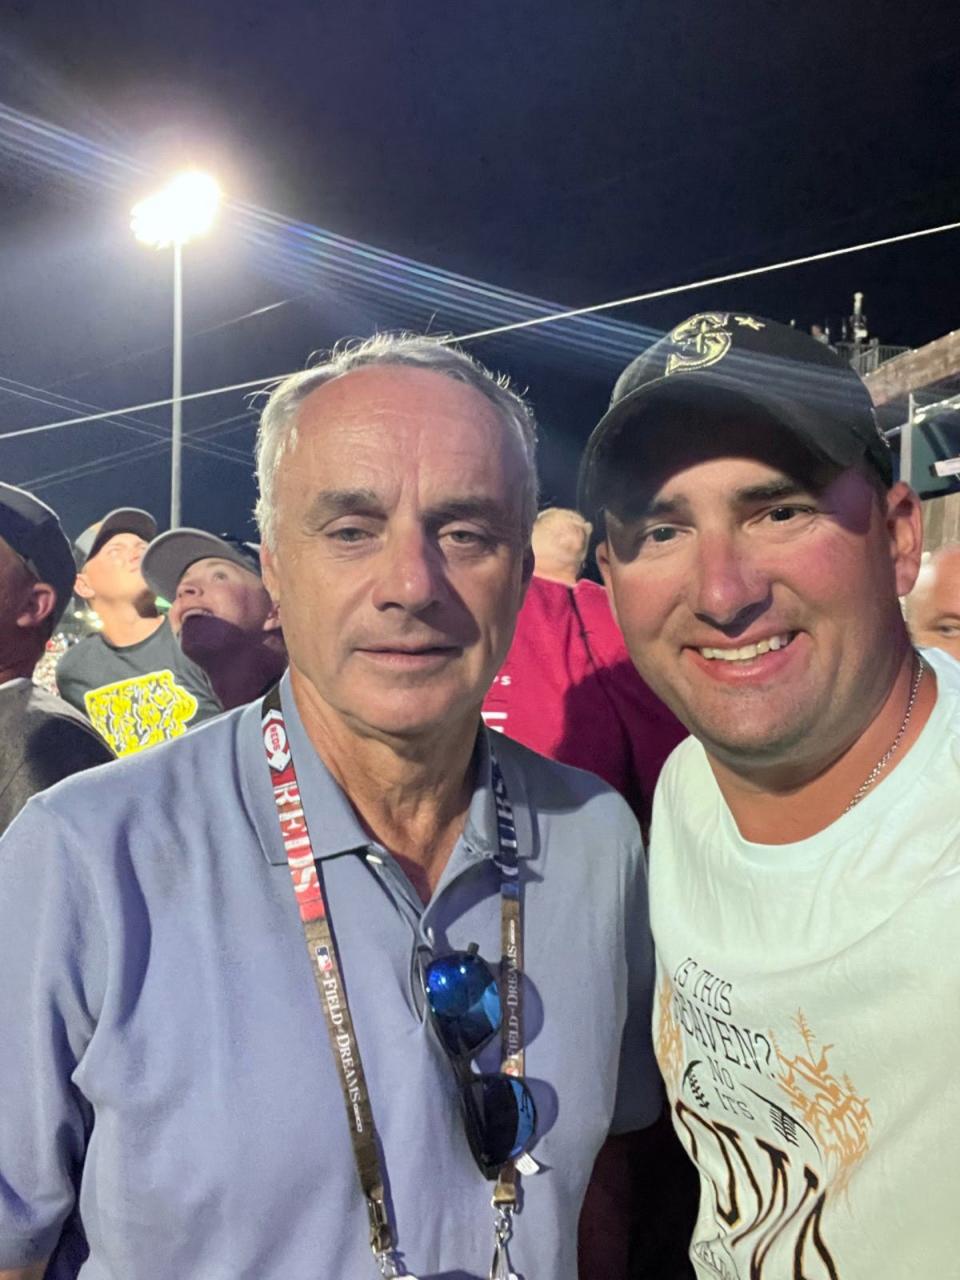 Danny Phipps and Rob Manfred, commissioner of Major League Baseball, during the Aug. 11 Field of Dreams game between the Chicago Cubs and Cincinnati Reds.